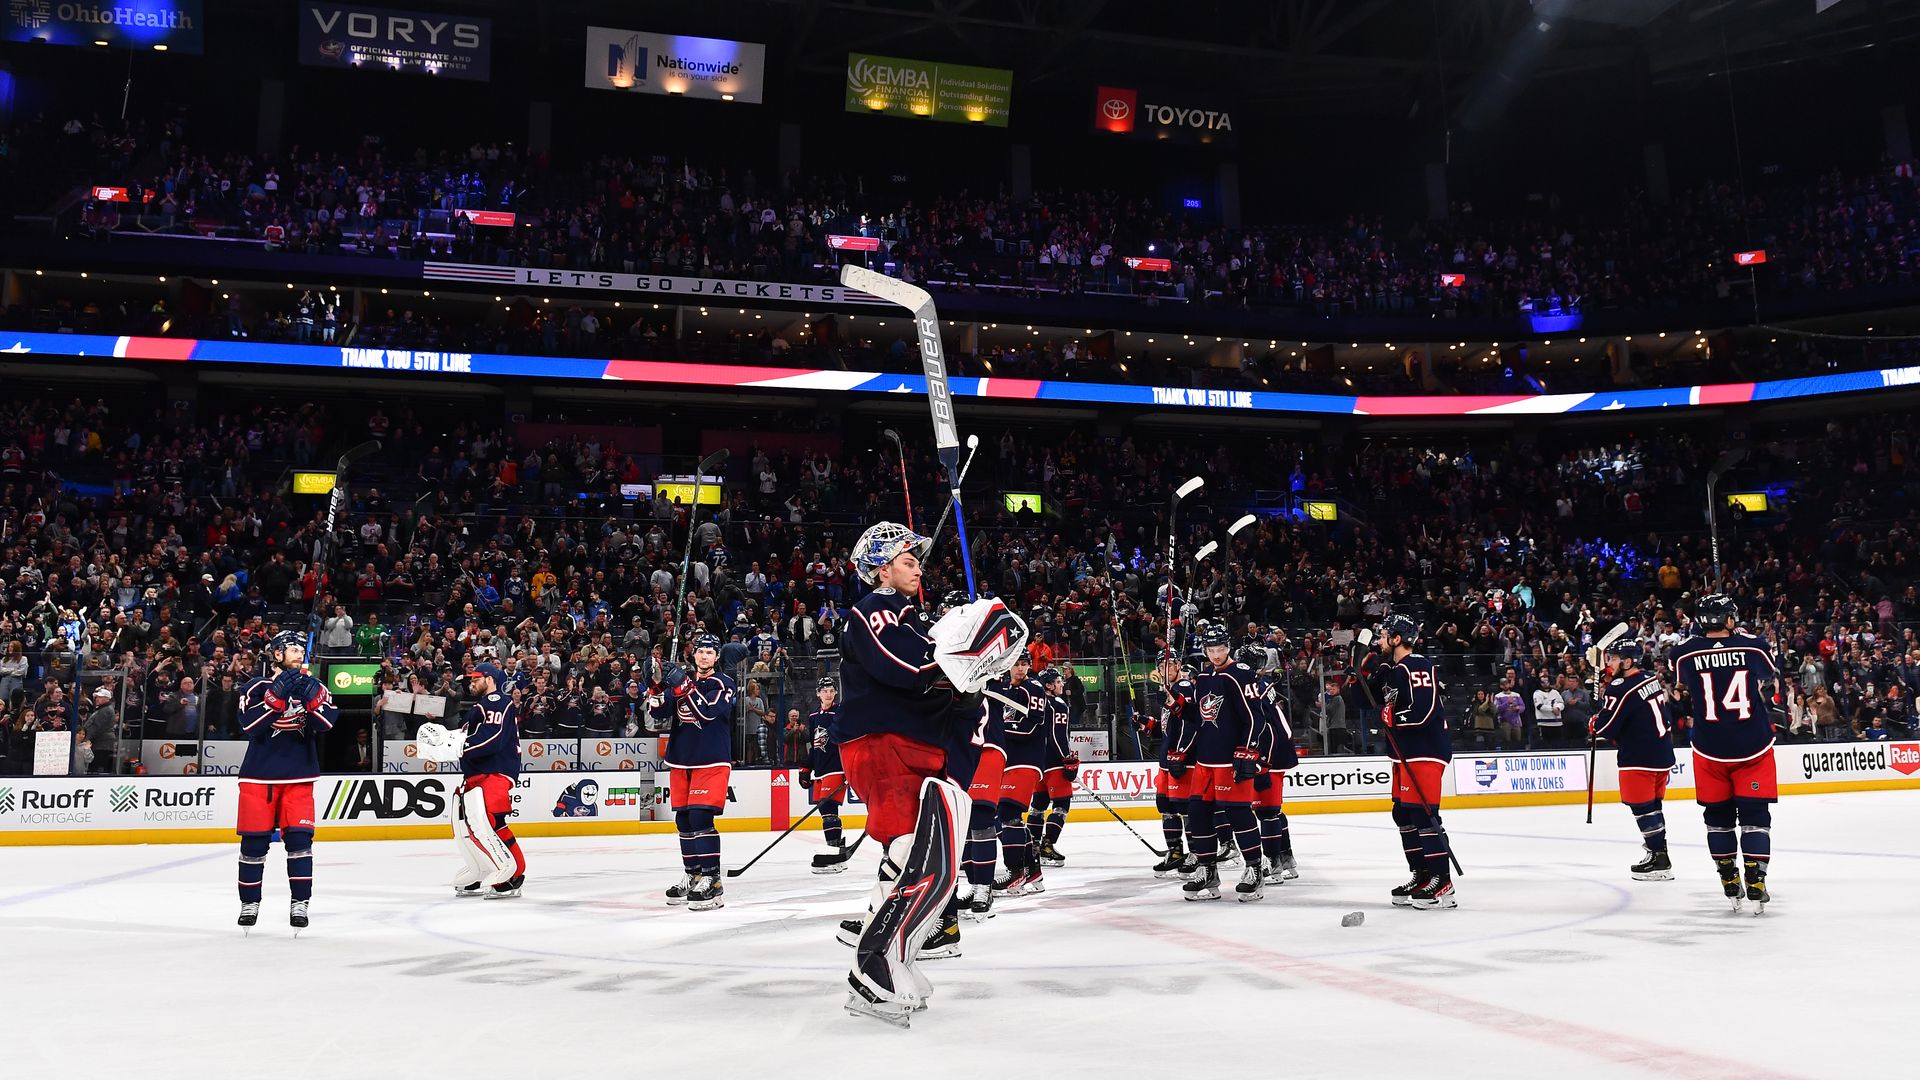 Columbus Blue Jackets raising their hockey sticks and saluting fans from the ice at Nationwide Arena.